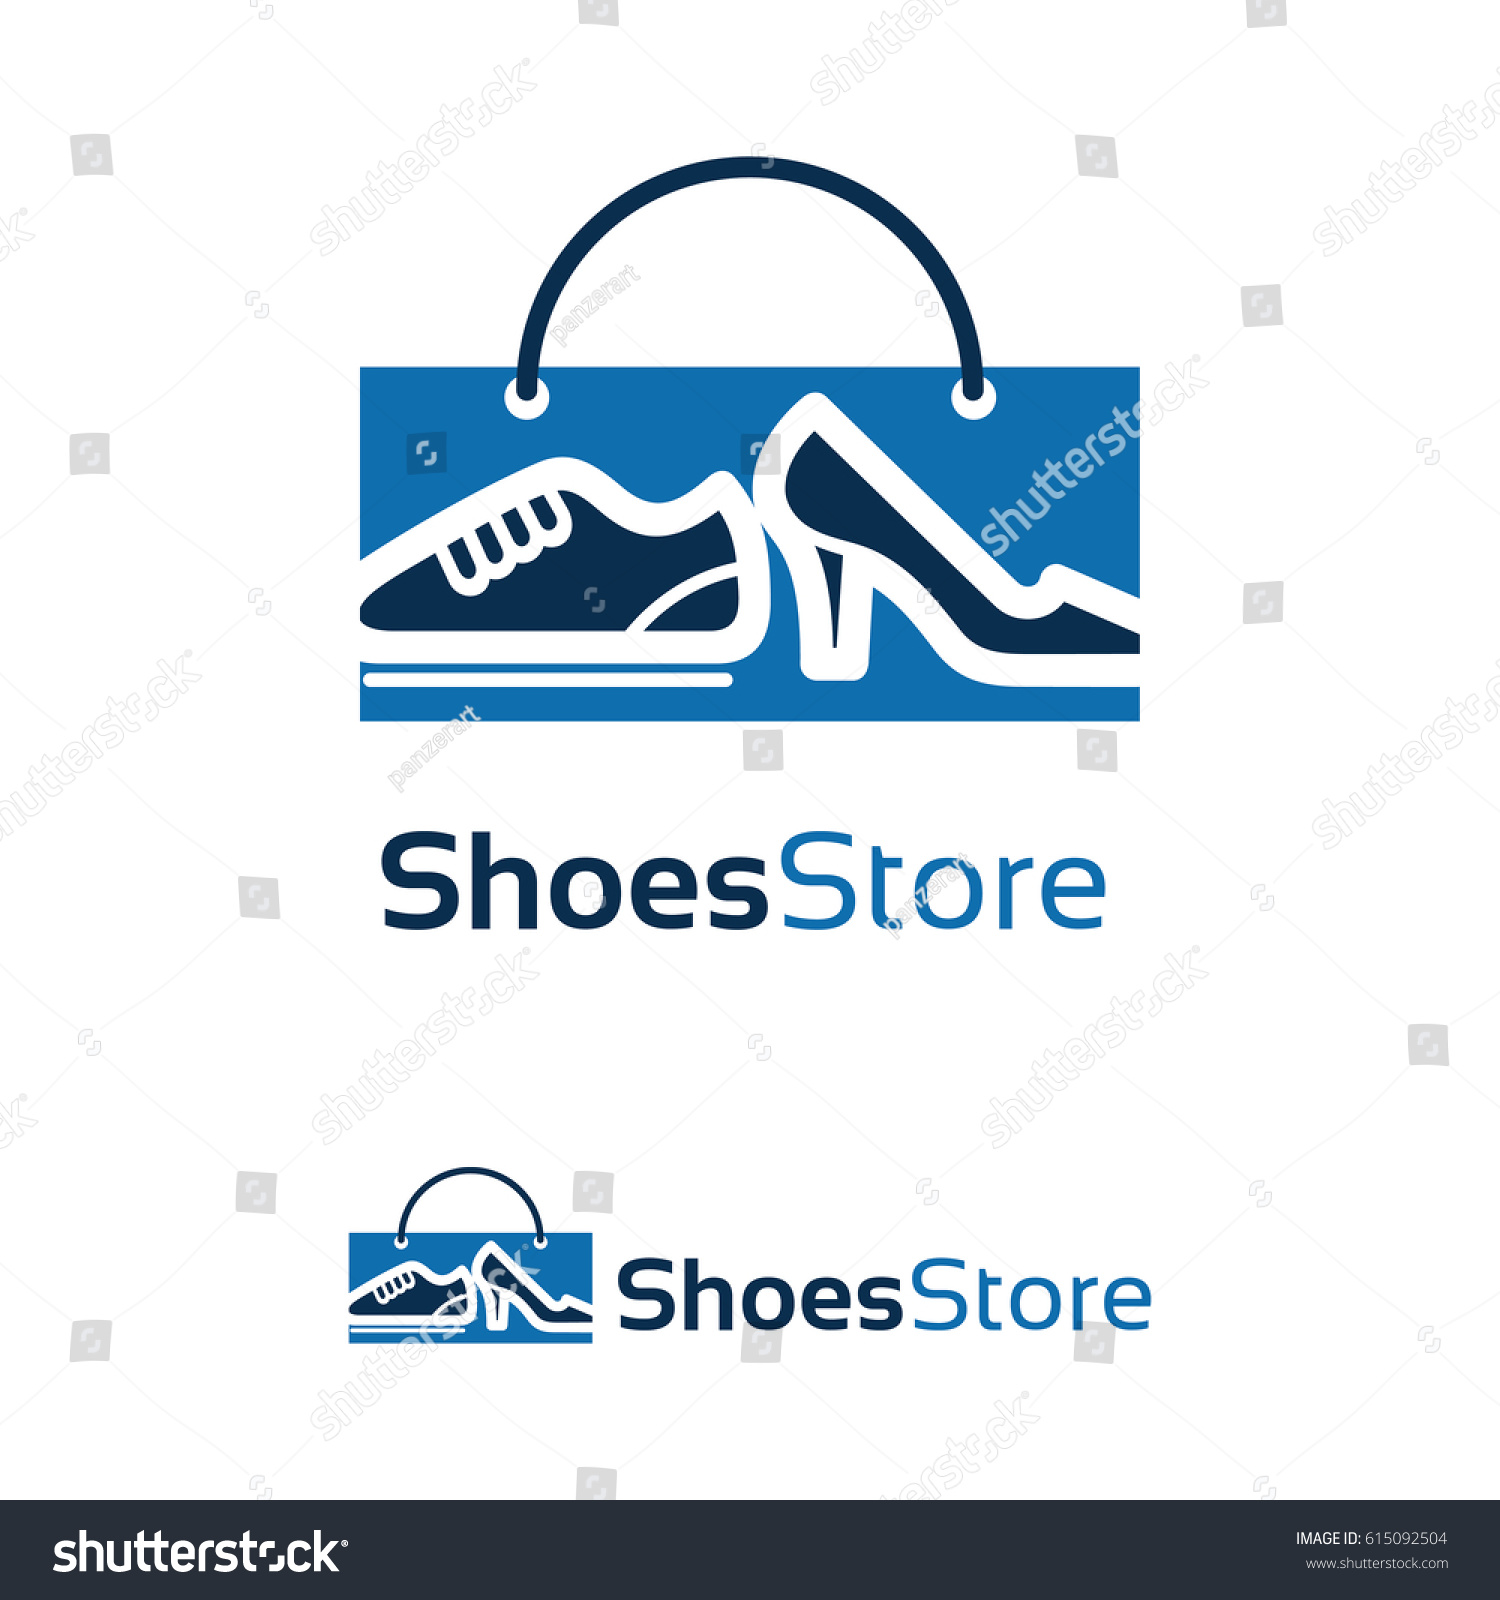 Shoes Store Logo Template Design Stock Vector (Royalty Free) 615092504 ...